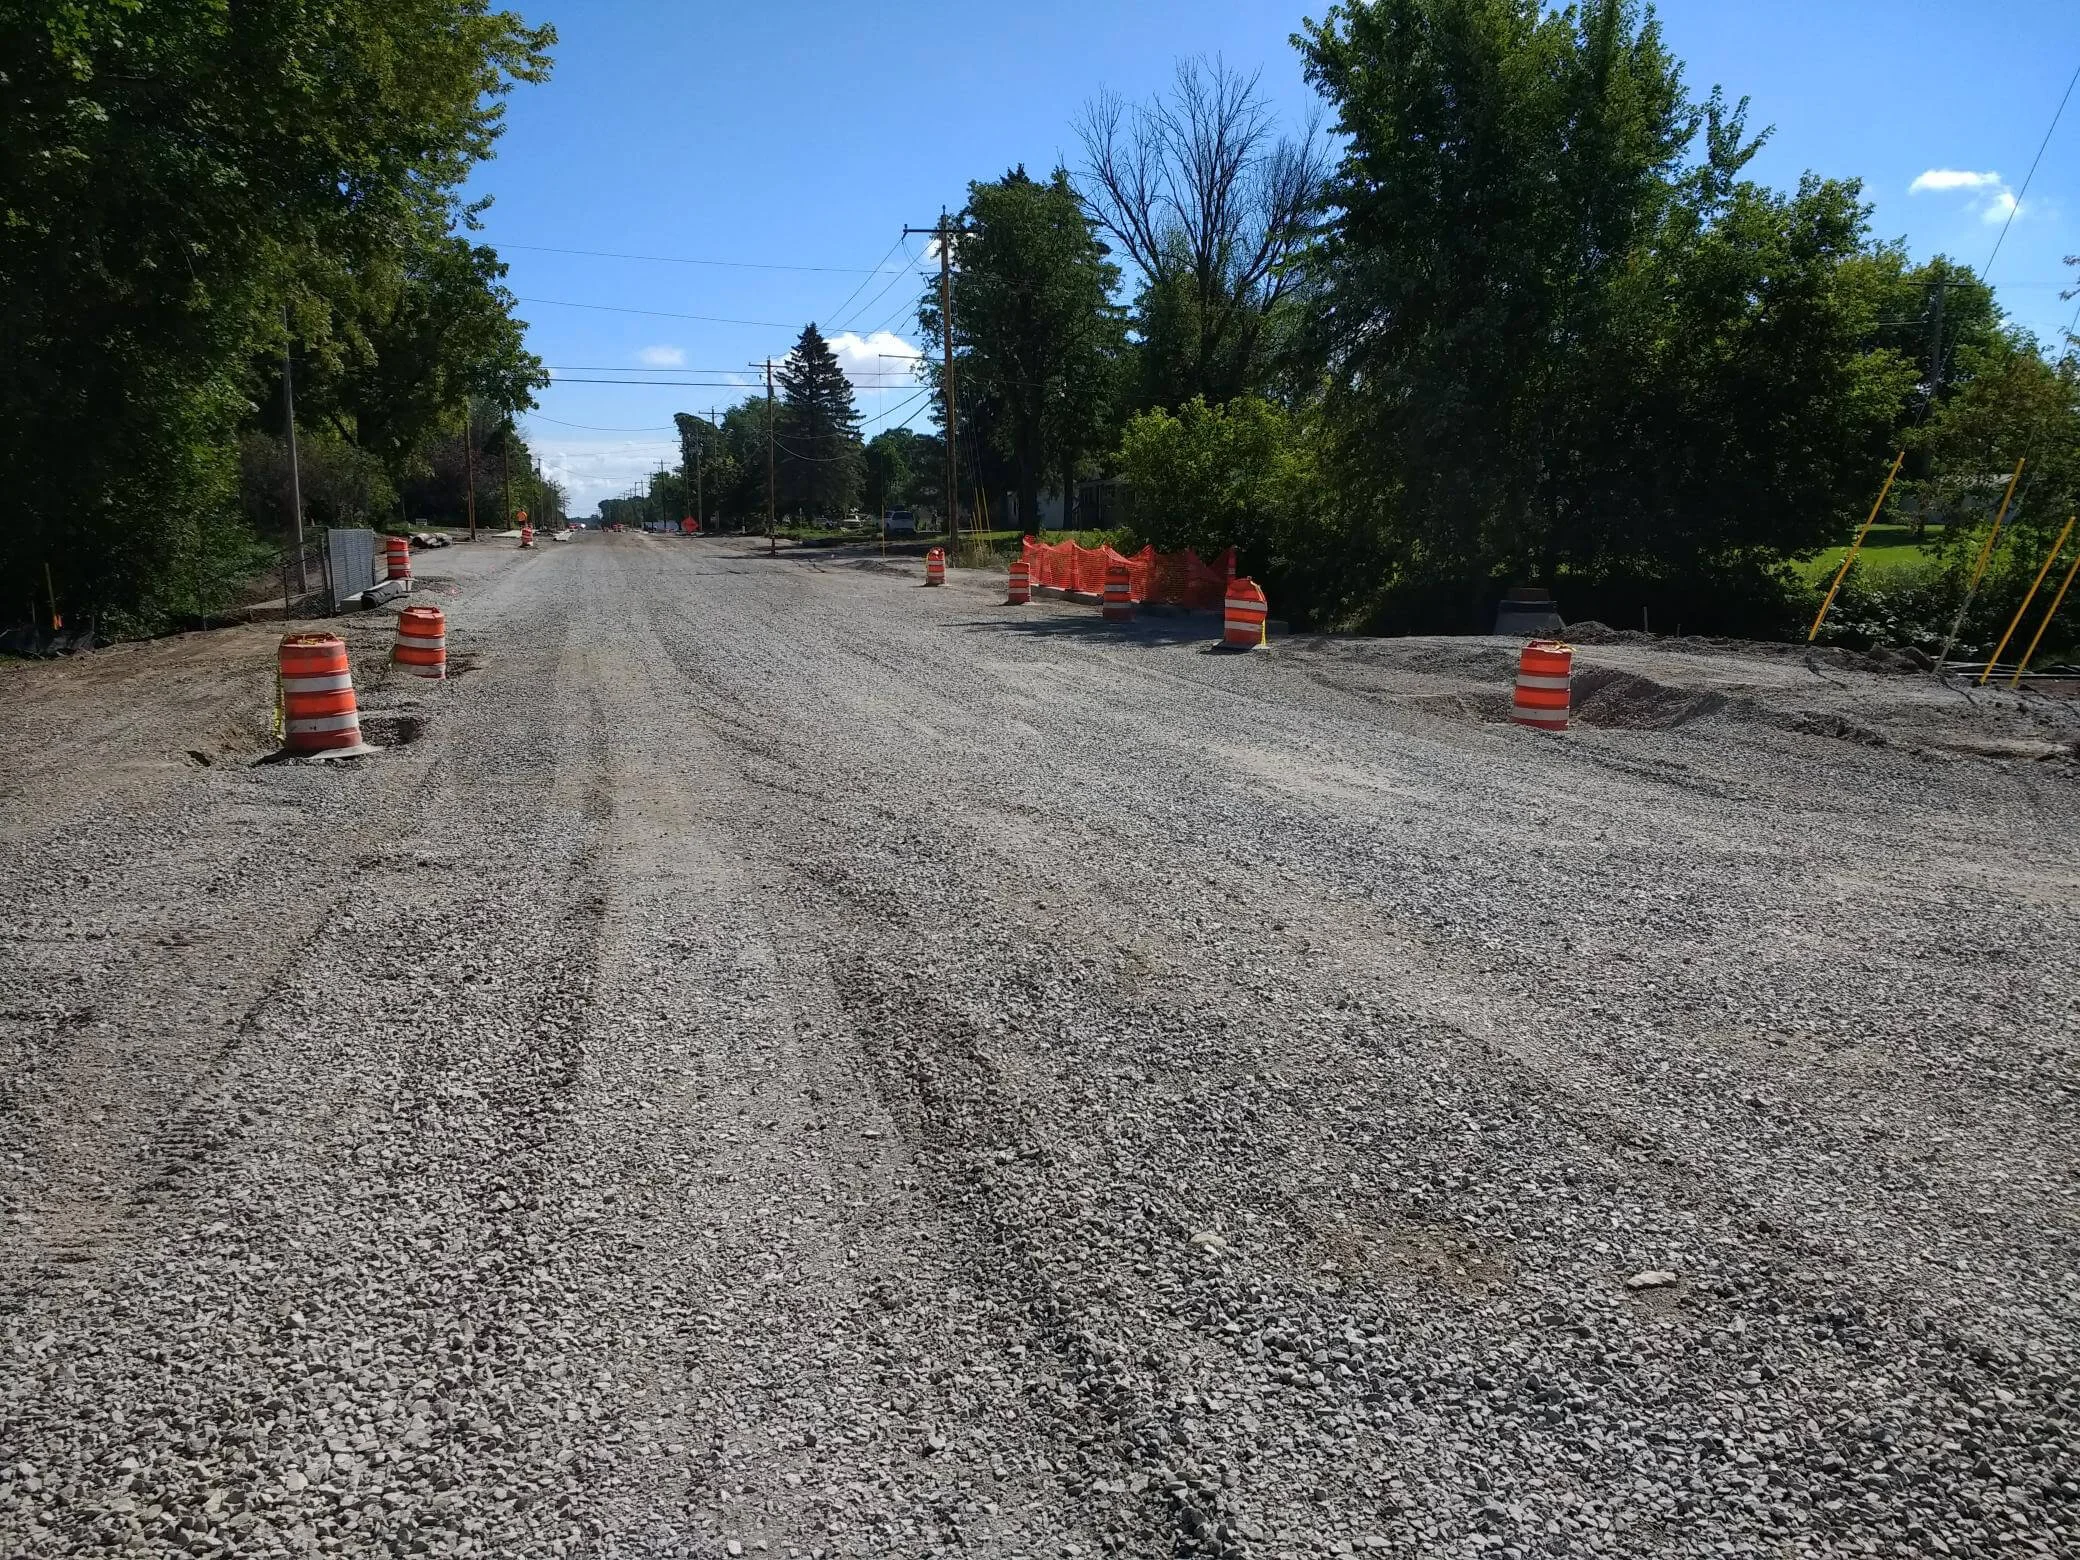 Construction barrels line the side of a wide gravel residential road